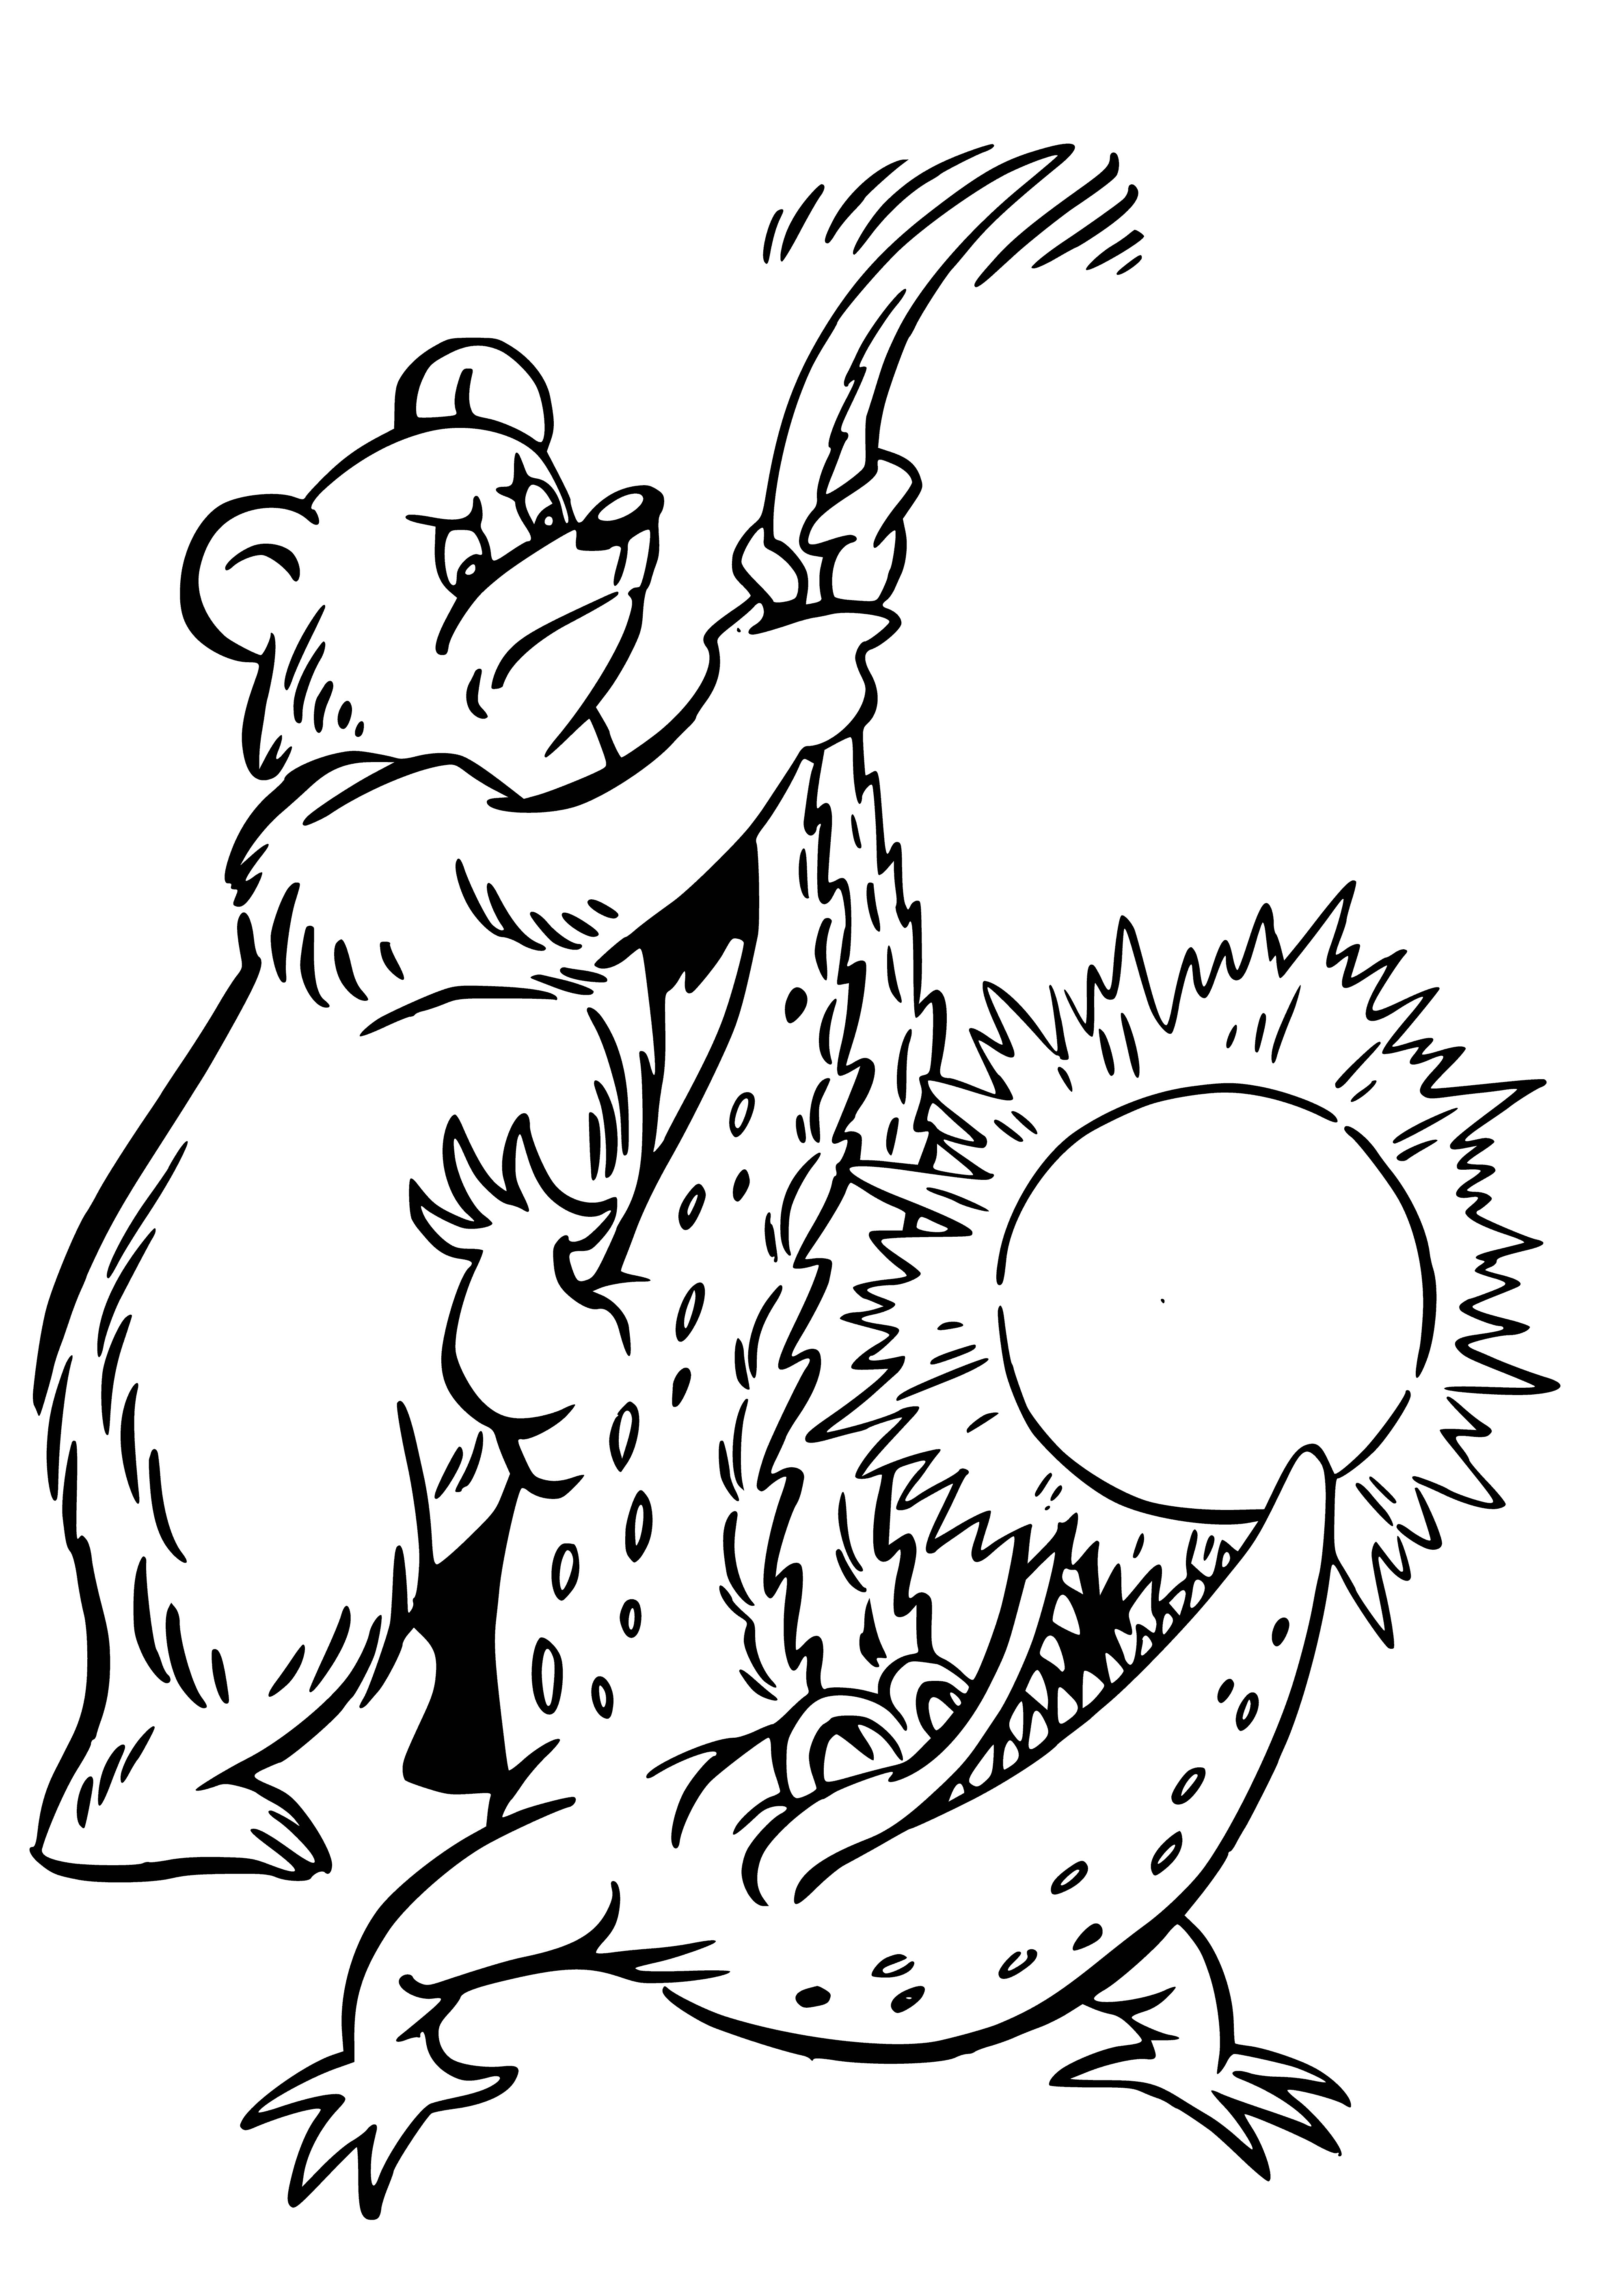 coloring page: Coloring page of a rooster with sun and tree, plus a smiling rabbit looking up at it.